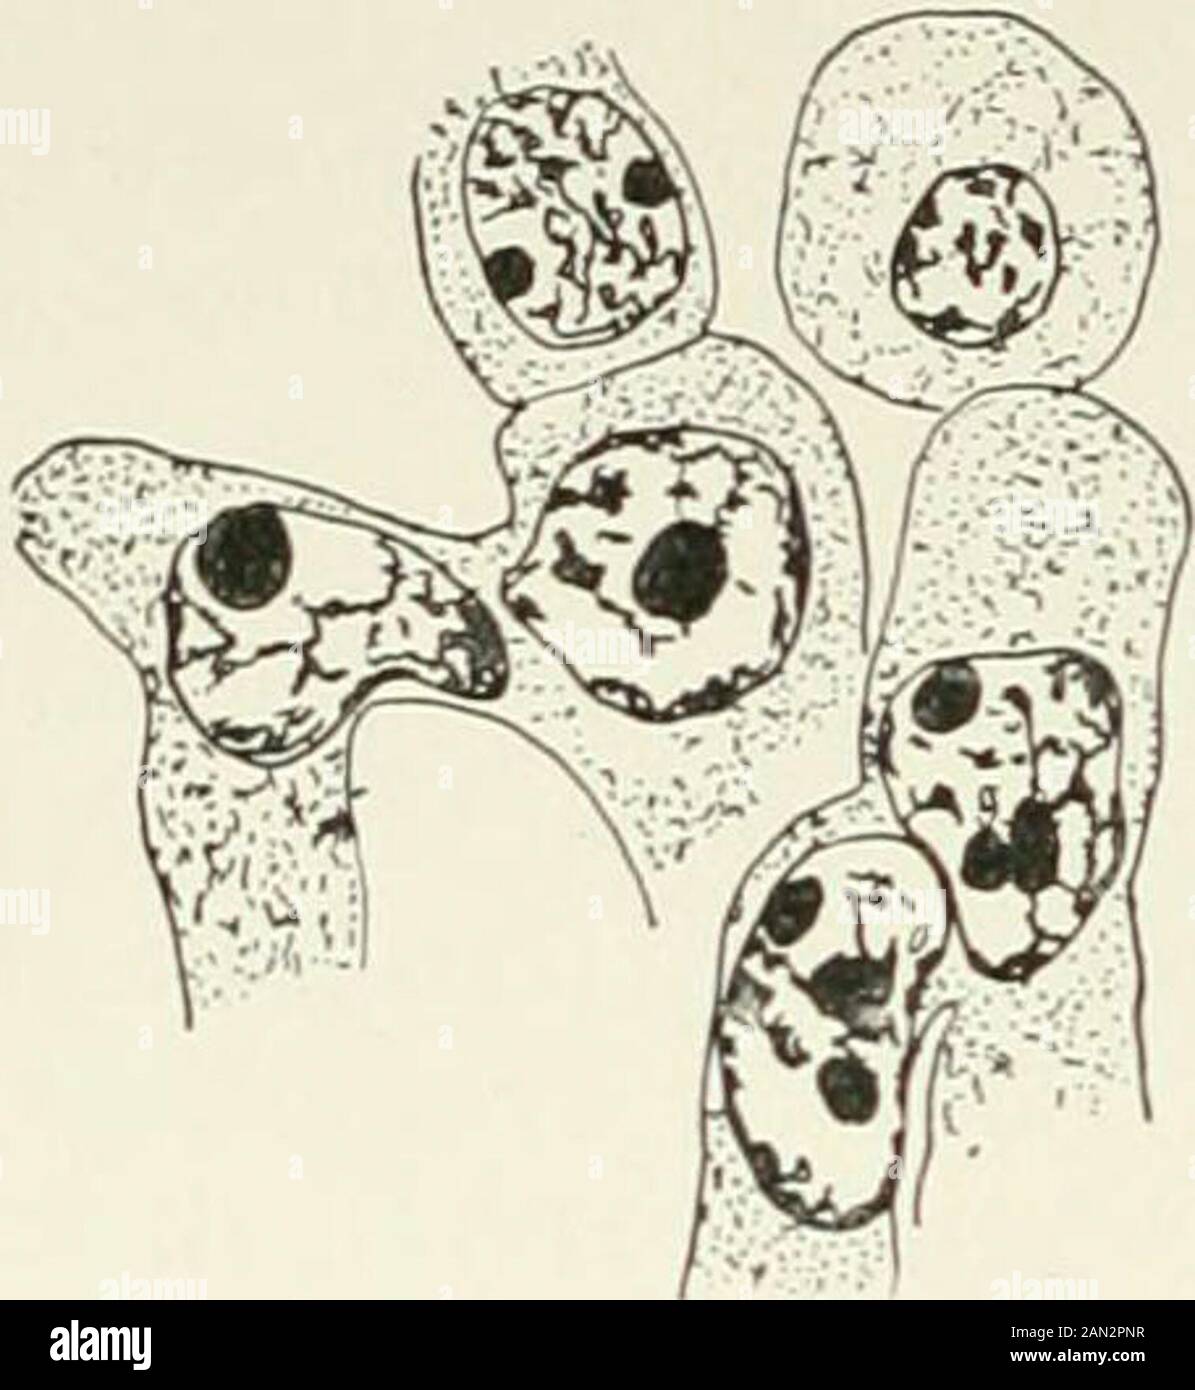 Fungi, Ascomycetes, Ustilaginales, Uredinales . eoma; sterile cell pushing up betweenepidermal cells of host, x 1.500; afterBlackman. Fig-9S- Phragmidium speciosum Fr.;fertile cells after conjugation; aecidio- spore mother-cell above ; after Christ-man. takes place and aecidiospore mother-cells arc cut off so that a single rowof aecidiospores is developed from each pair of gametes. Christman regardsthe fertile cells as isogametes between which conjugation takes place, andthe sterile cells merely as buffers, of which the function is to assist in therupture of the epidermis. His observations on Stock Photo